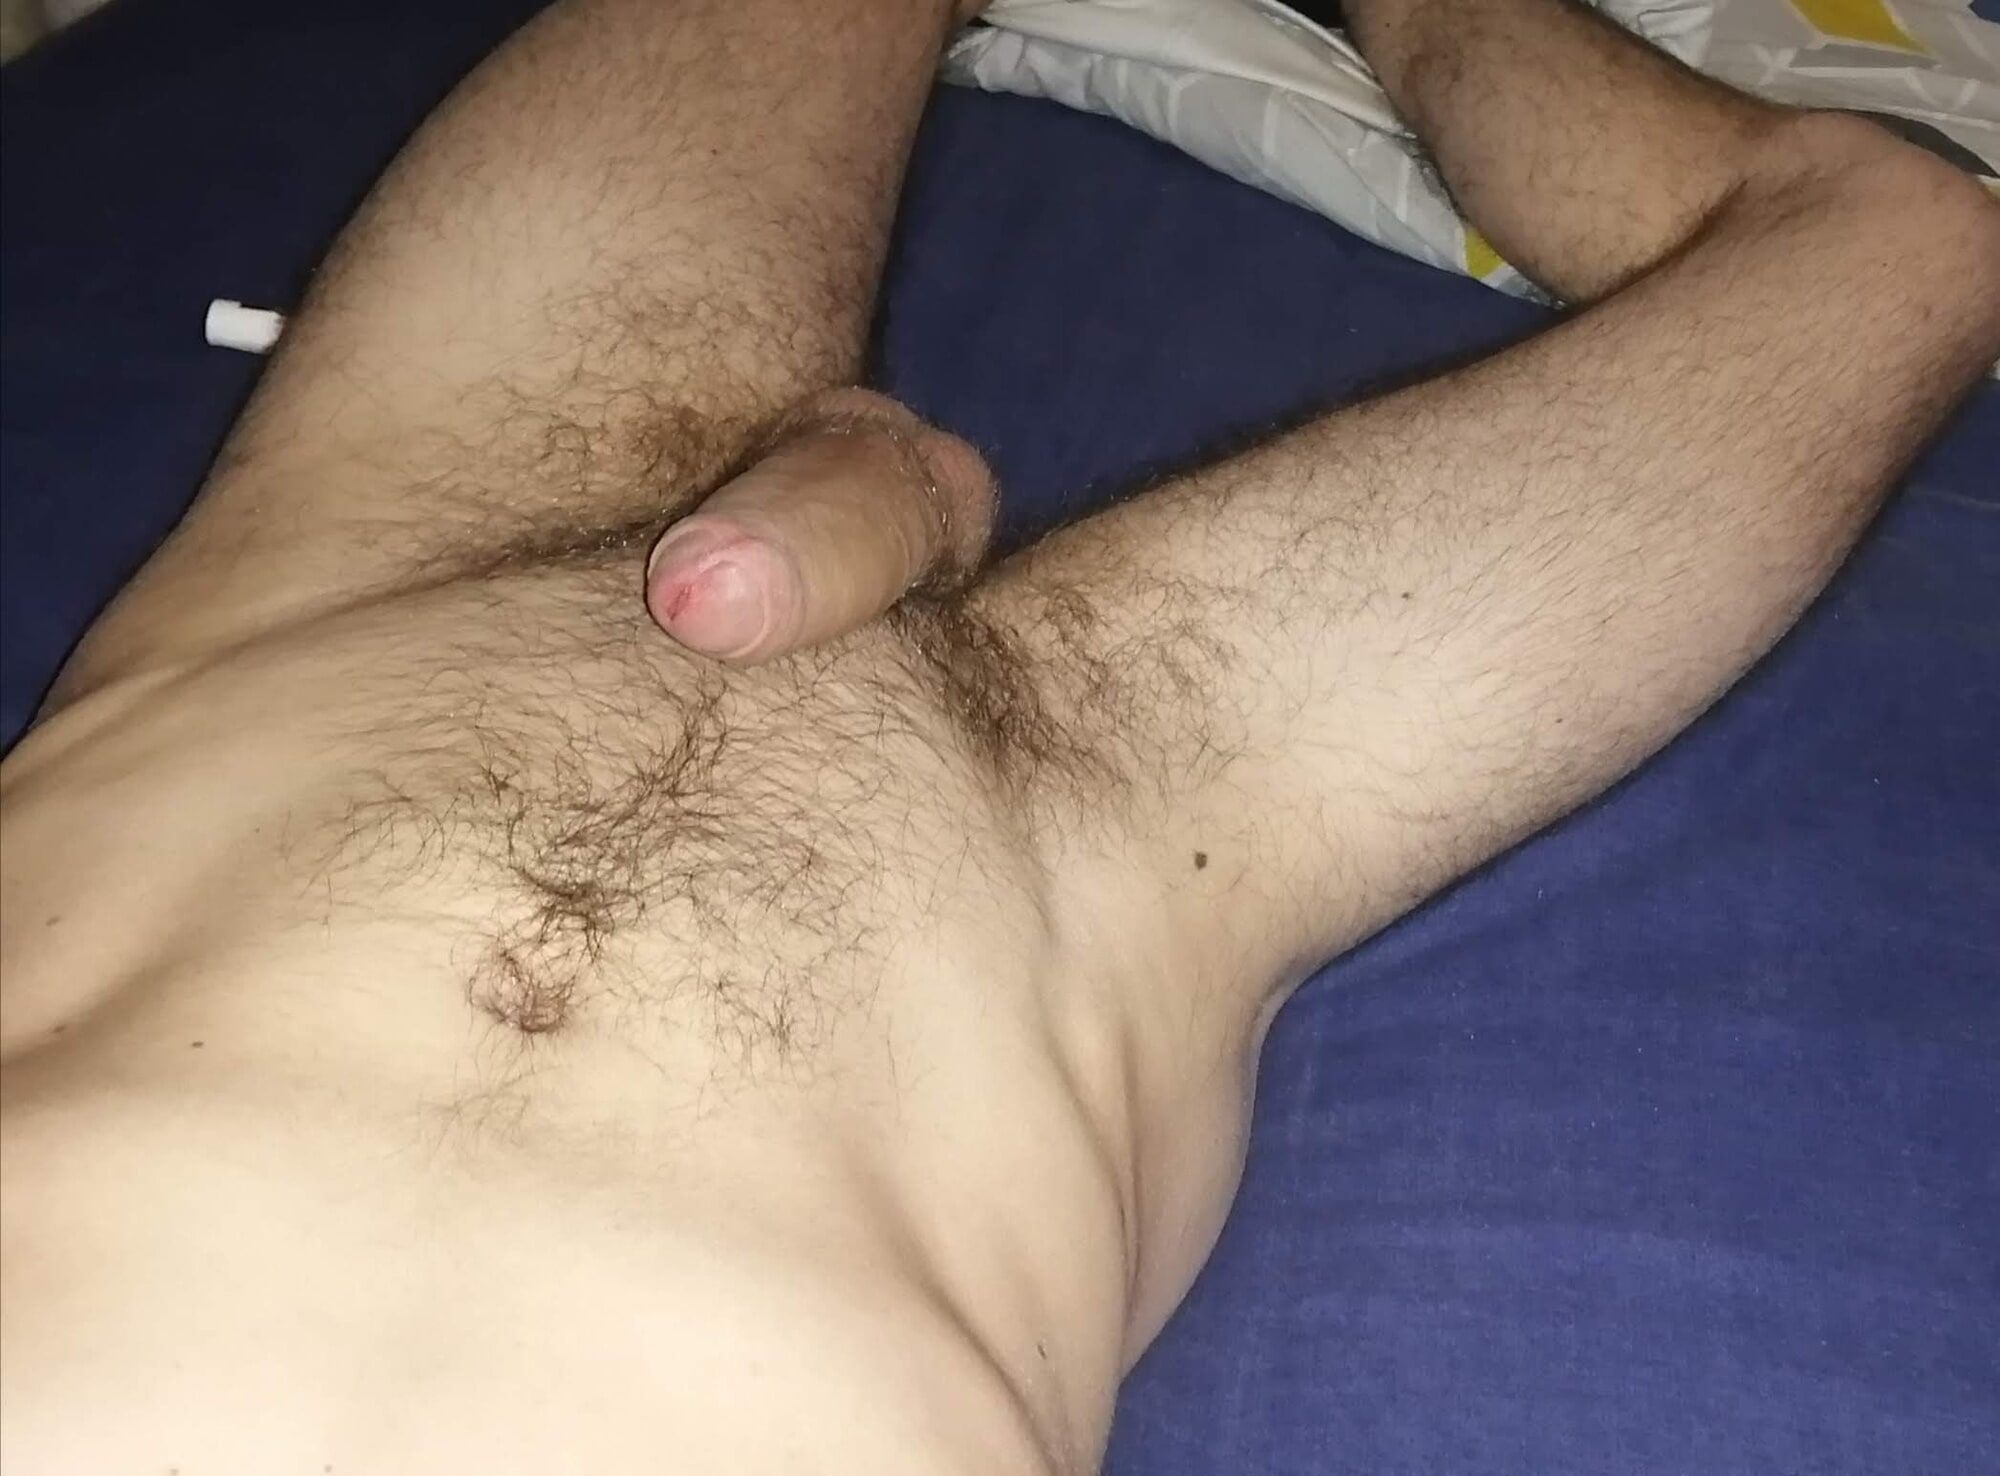 Me and my dick #7